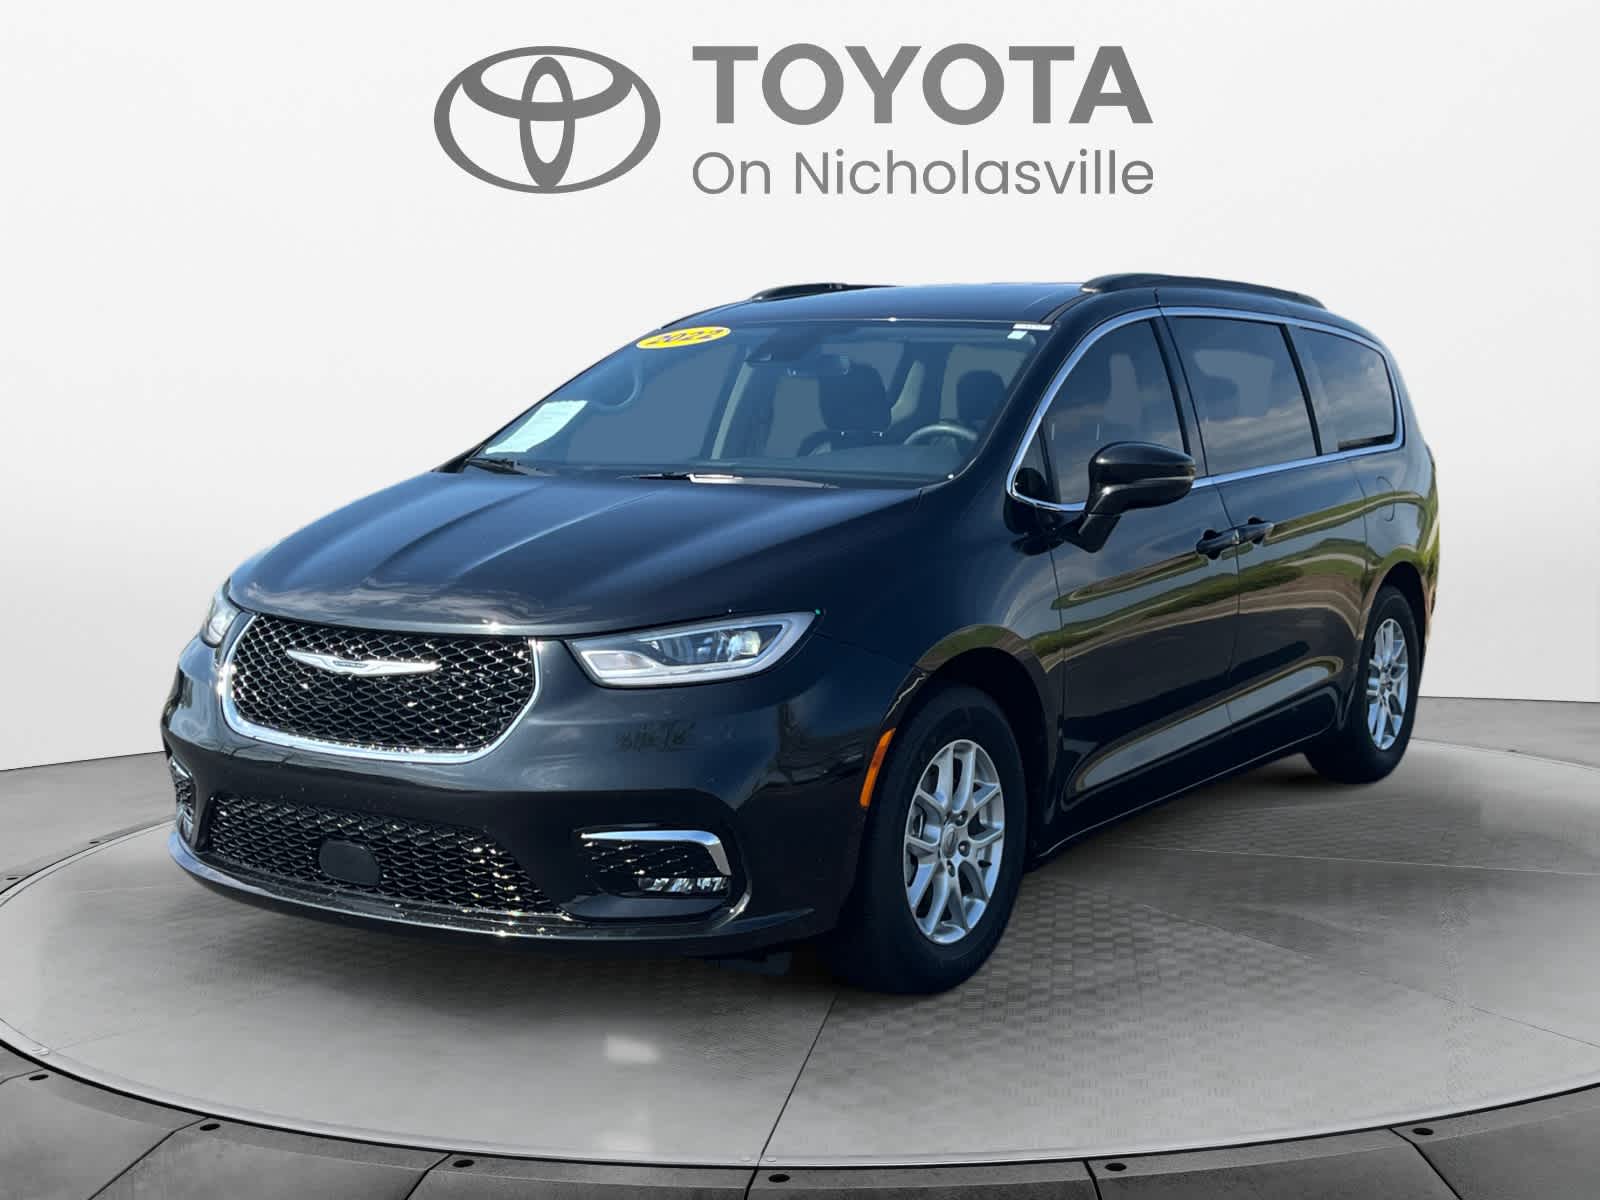 2022 Chrysler Pacifica Nicholasville KY